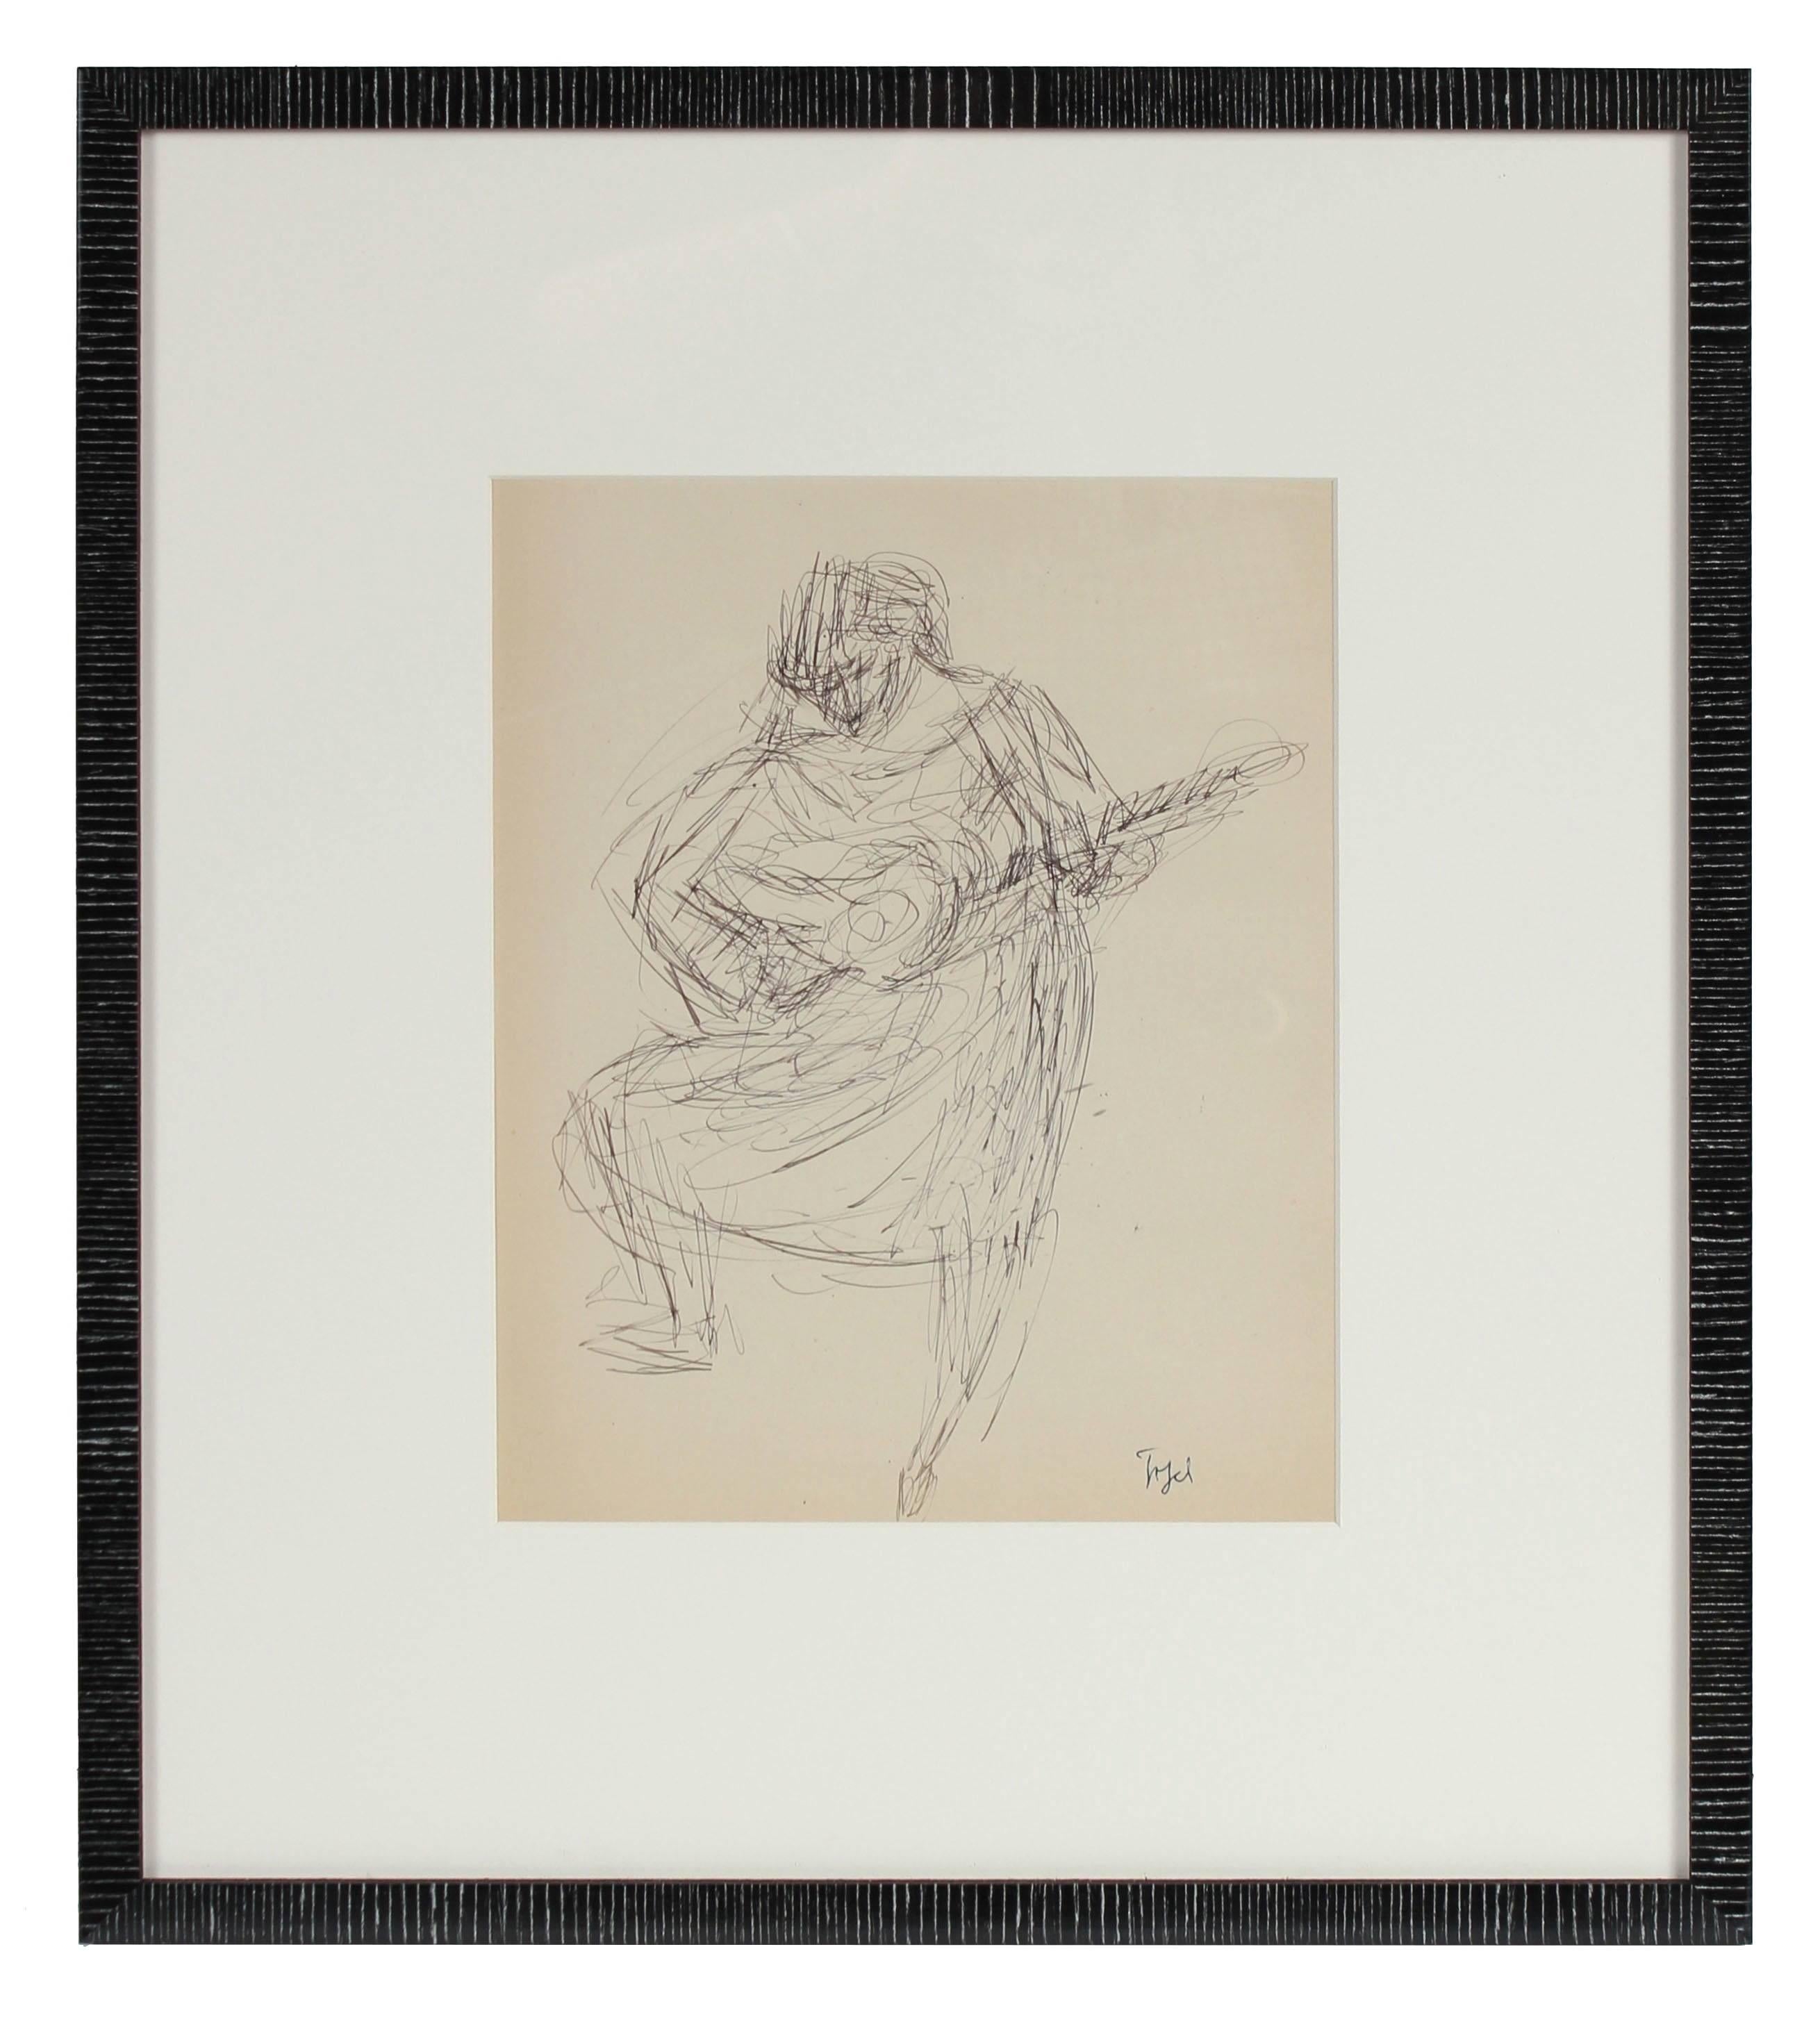 Jennings Tofel Figurative Art - Expressionist Woman Playing Guitar, Framed Ink Sketch, Early to Mid 20th Century